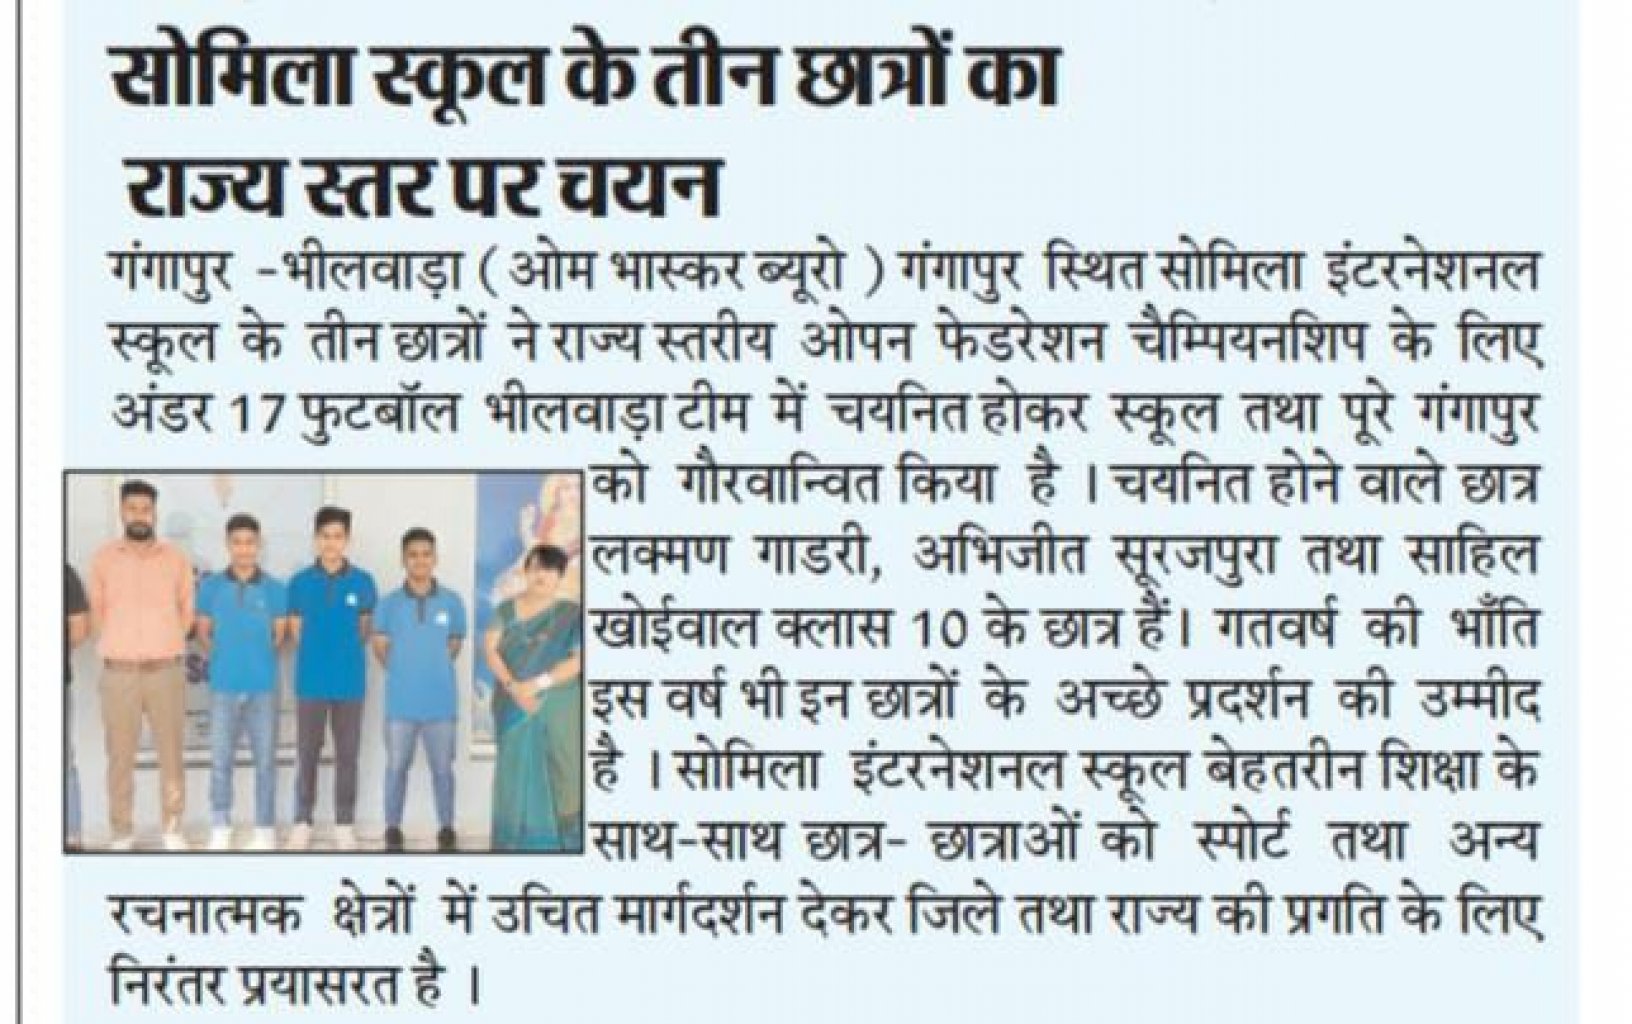 Somila in New Again !   Sahil Kohilwal, Abhijeet Surajpura, Laxman Gadri ( Class 10th Students) SIS, Gangapur slected for under 17 State Level open Federation Championship.